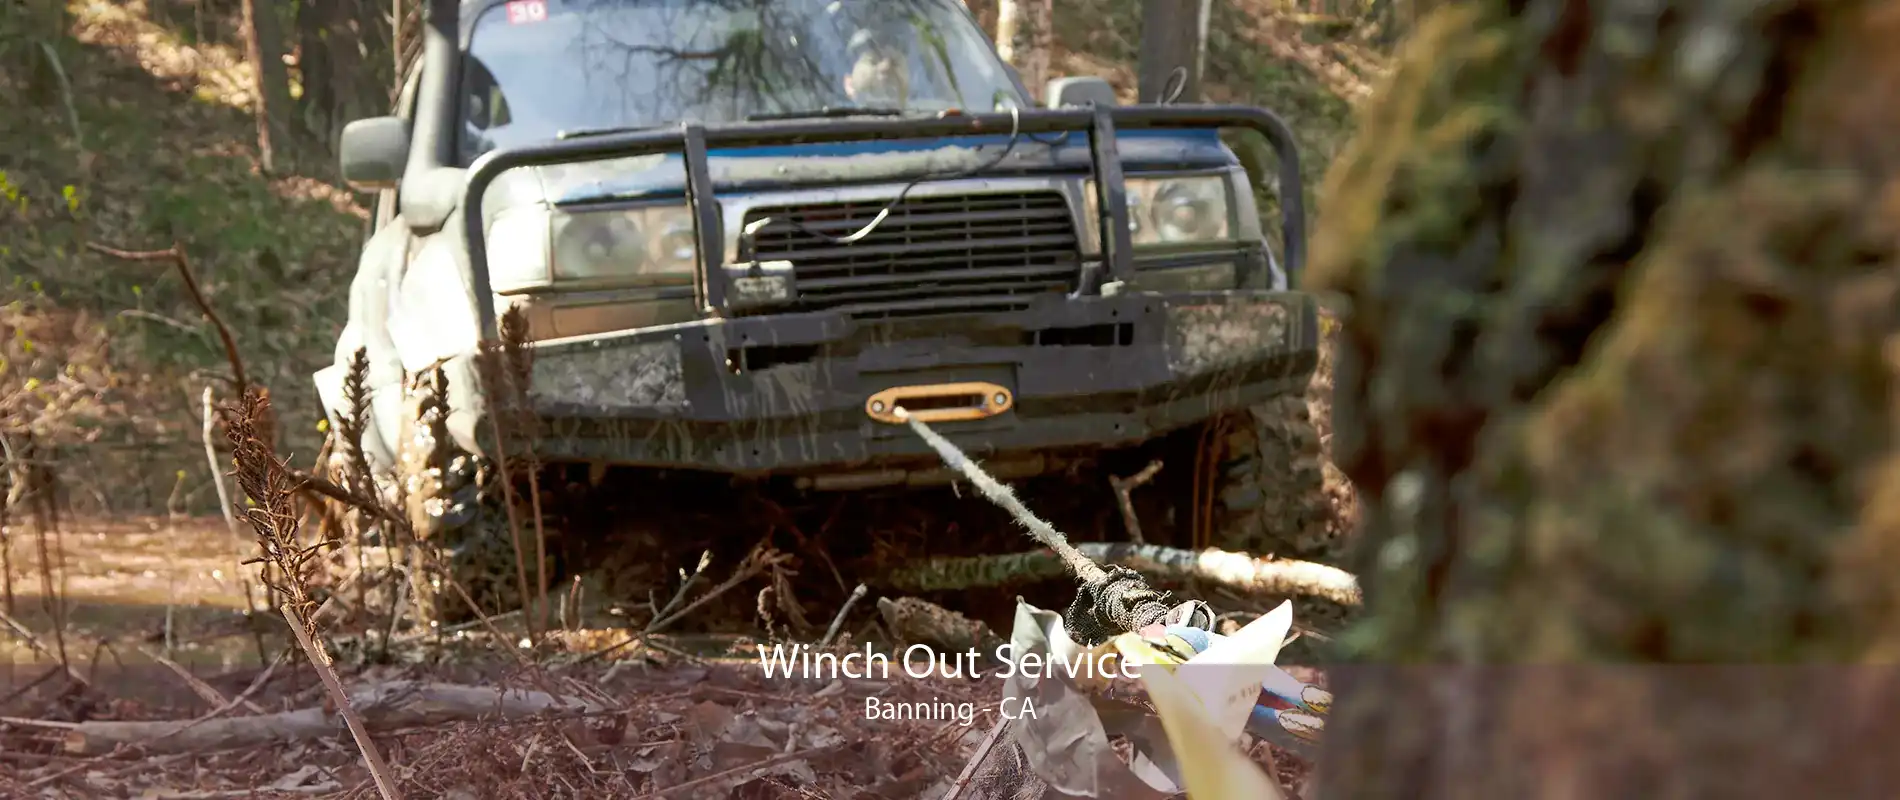 Winch Out Service Banning - CA